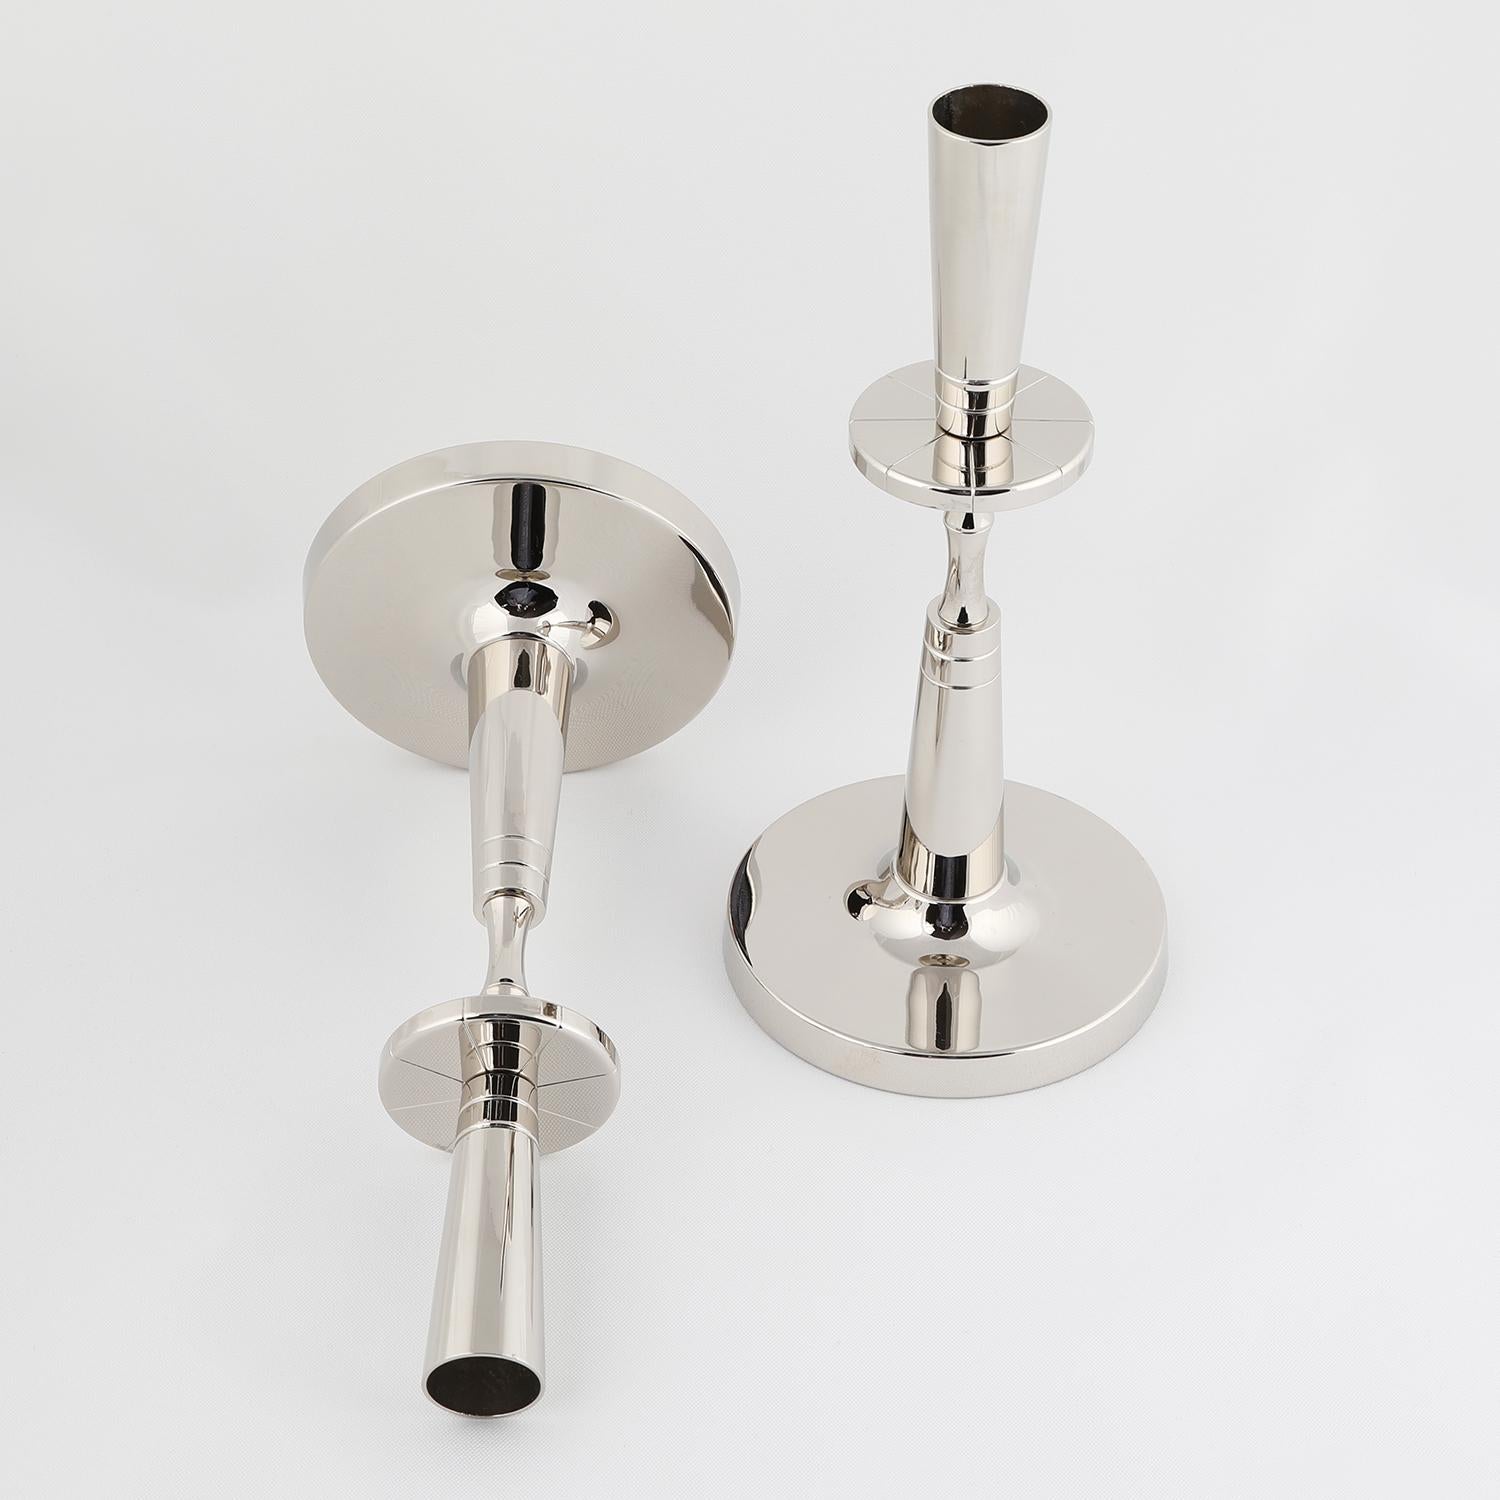 Mid-Century Modern Tommi Parzinger Pair of Candelabra in Polished Nickel 1950s (Signed) For Sale